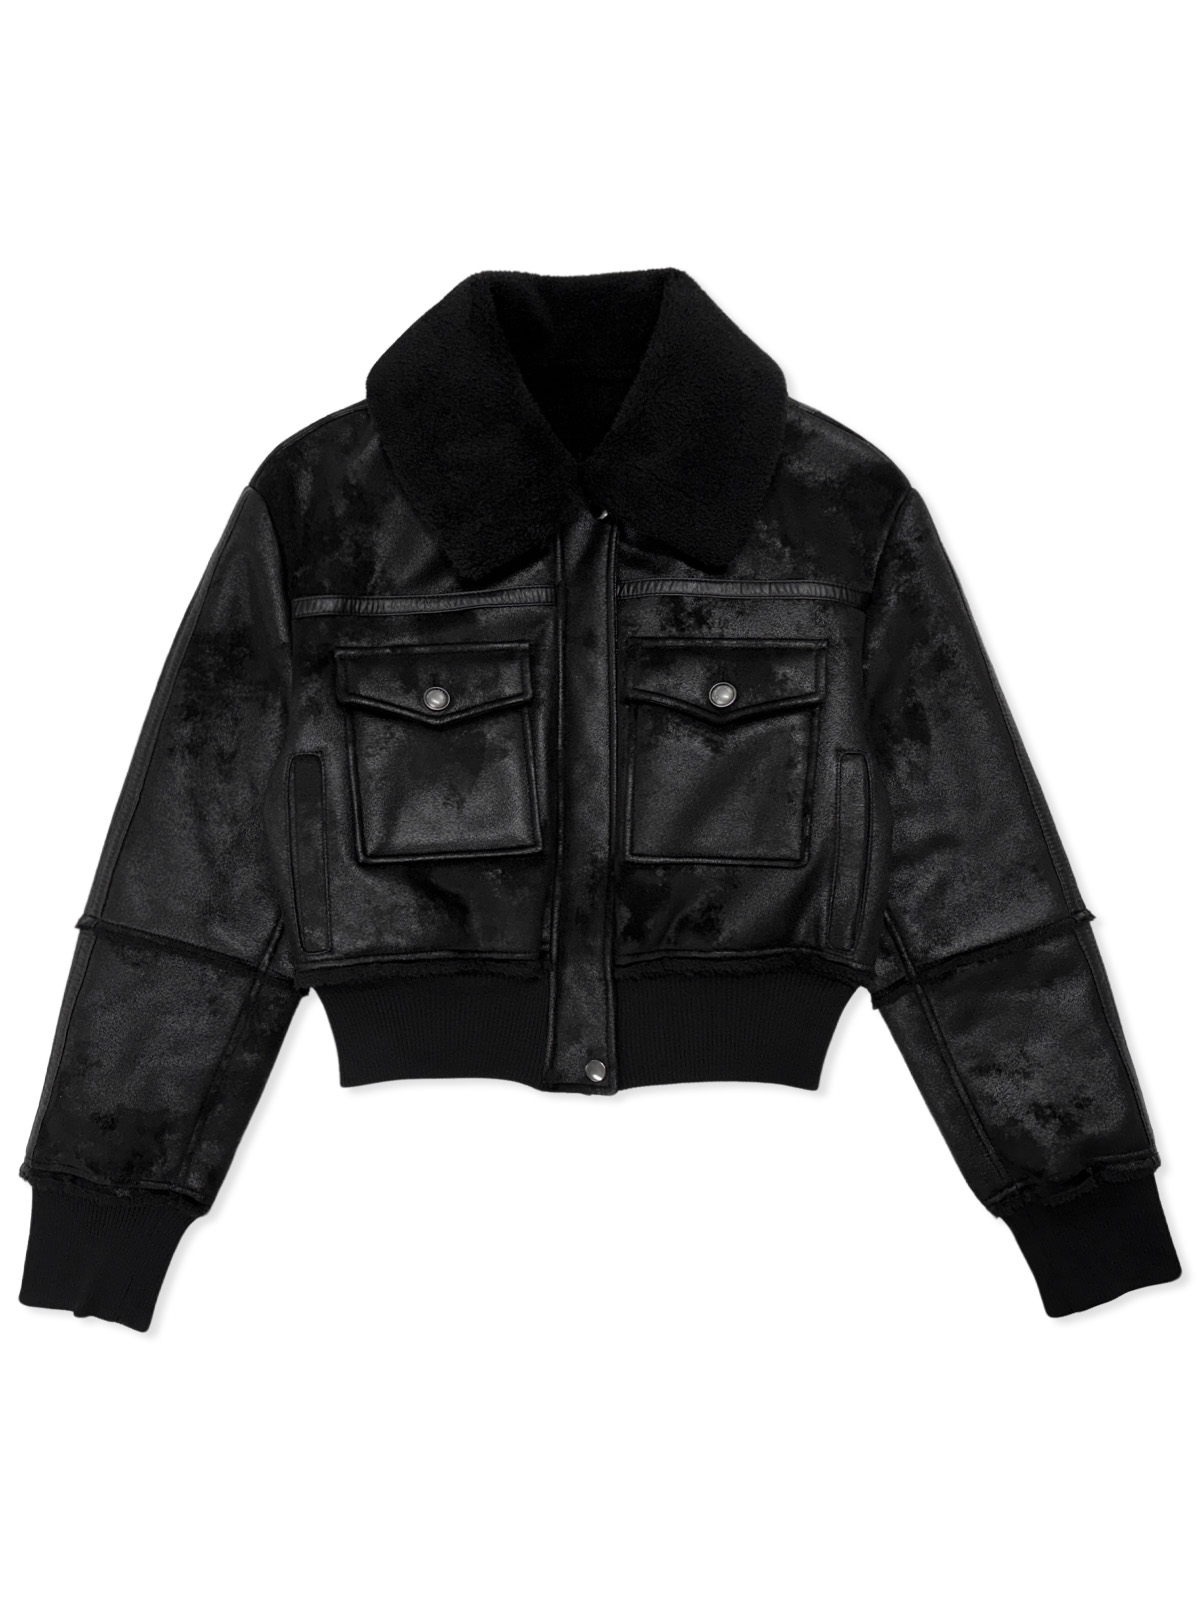 Cracked Suede Shearling Jacket In Black